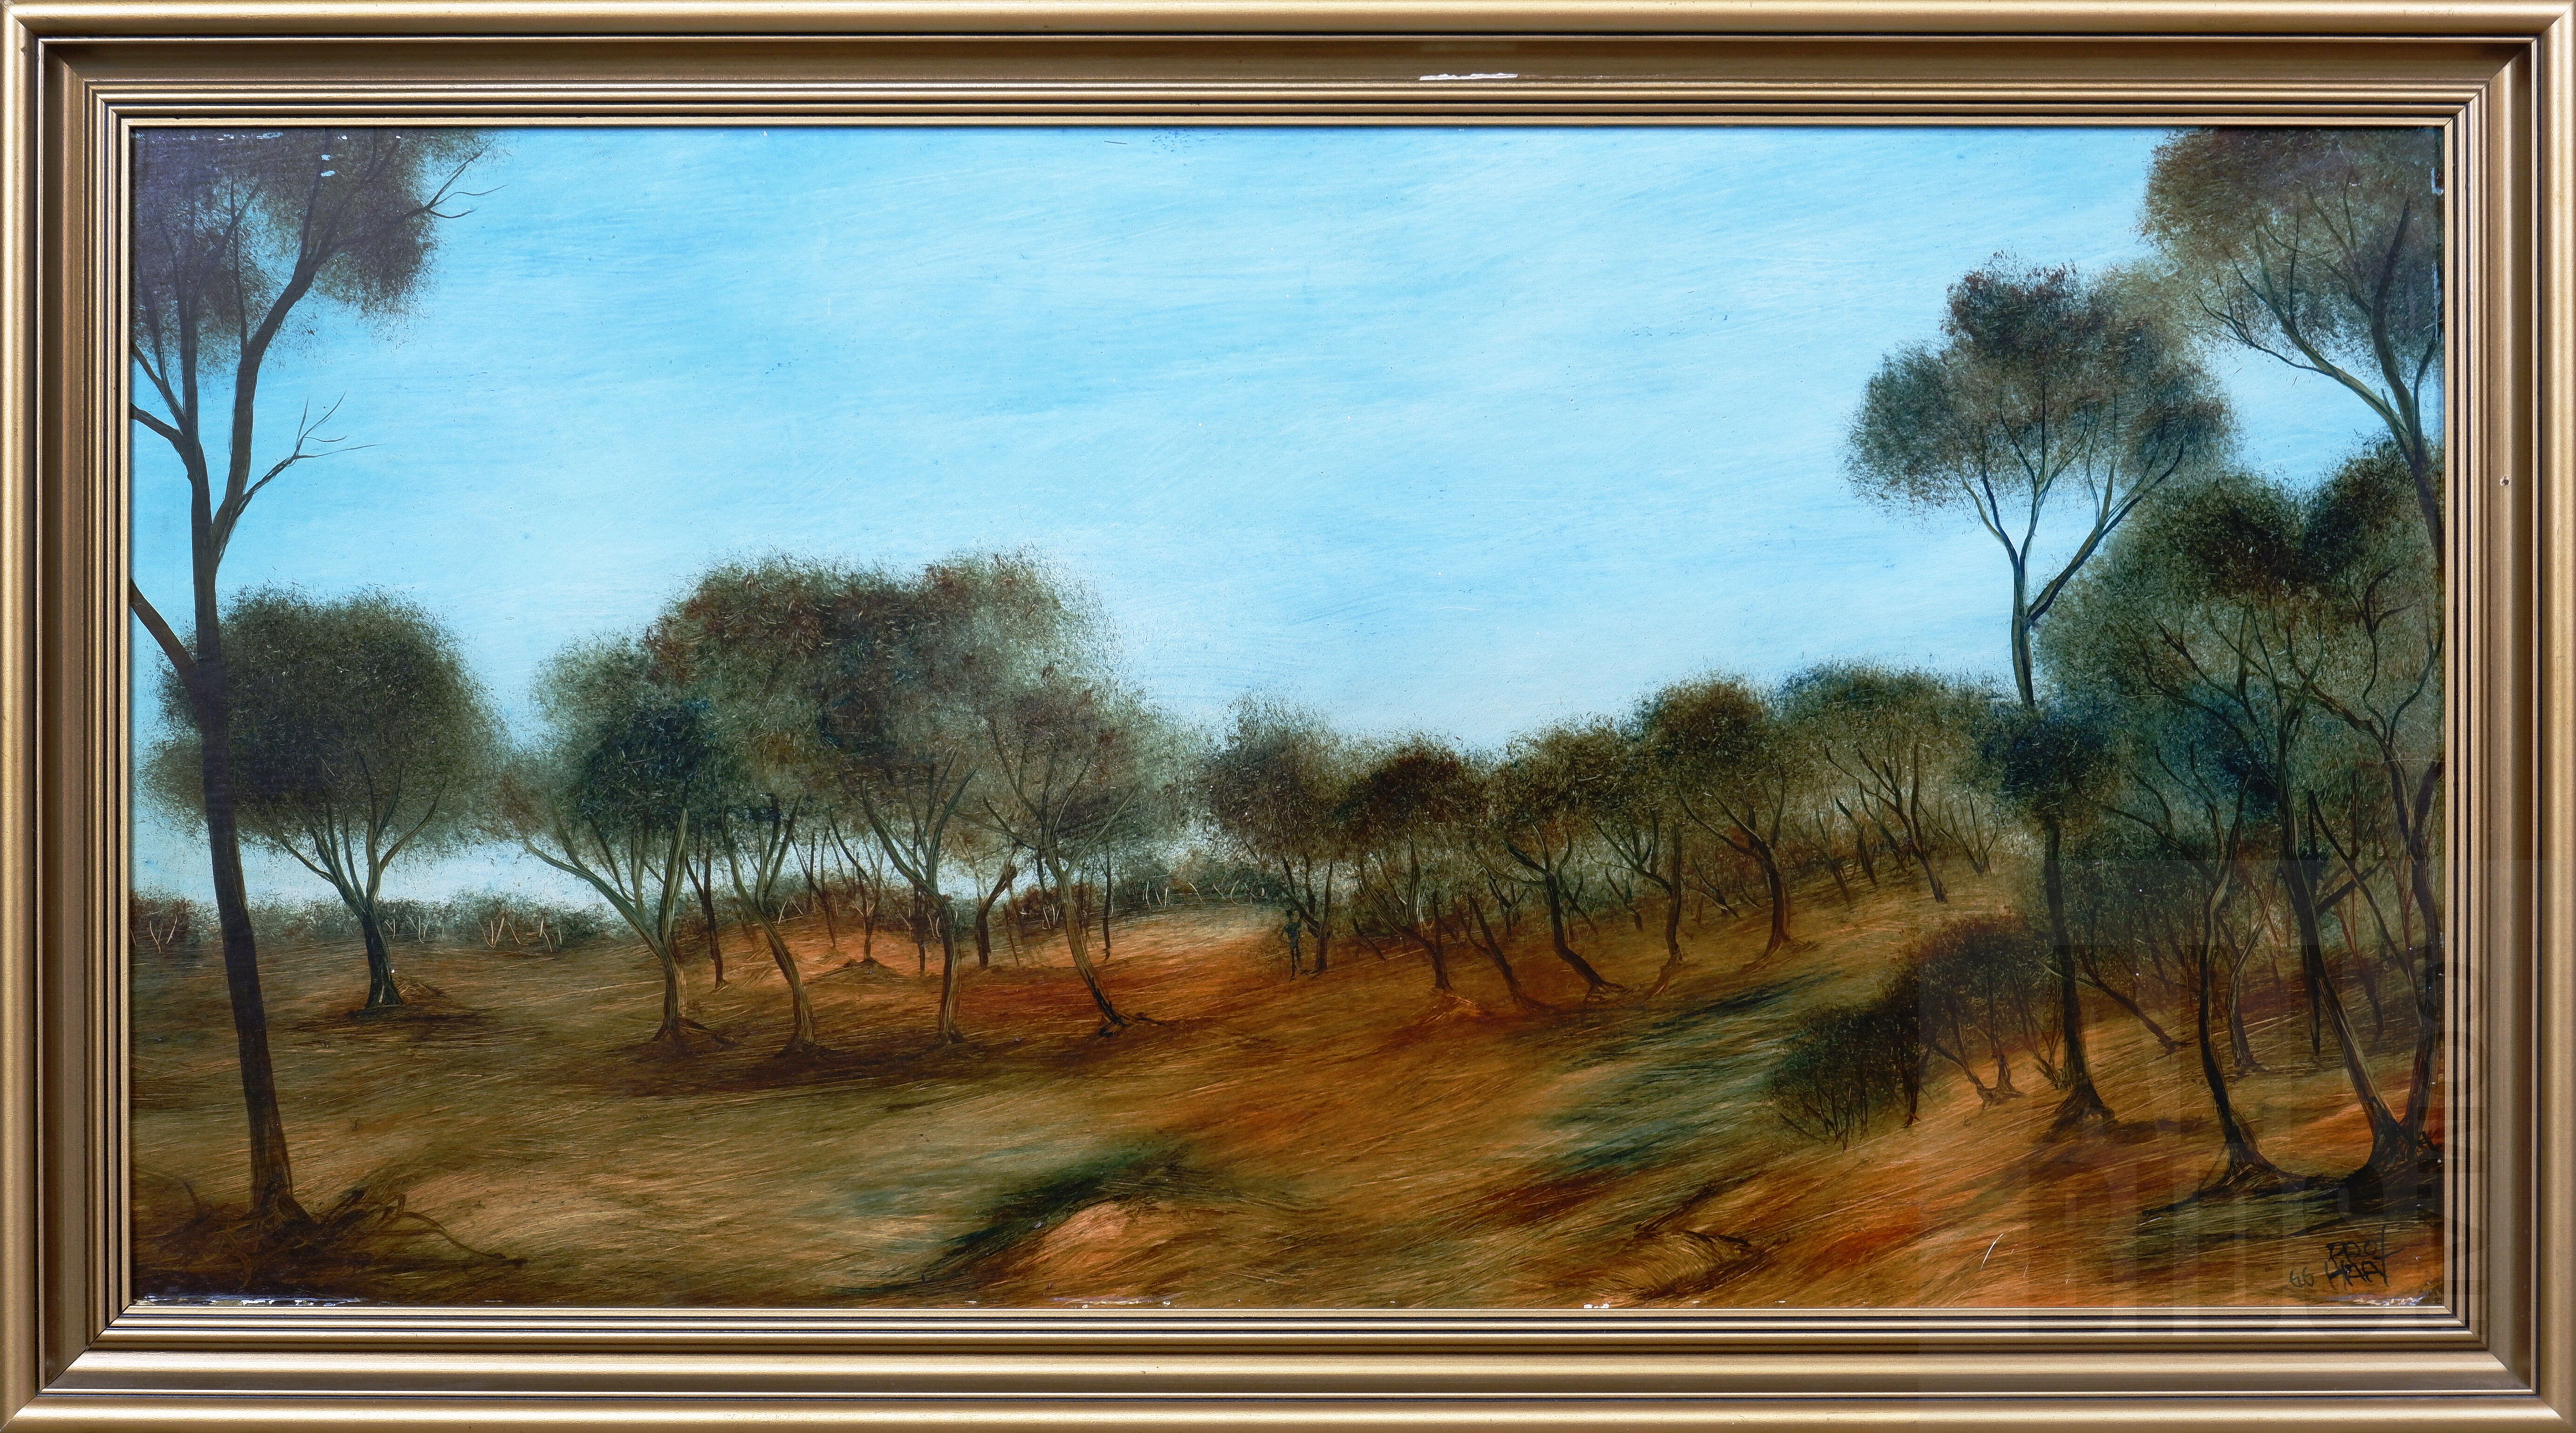 'Pro Hart (1928-2006), Landscape With Man Standing by a Tree 1966 Oil on Board, 39 x 76 cm'